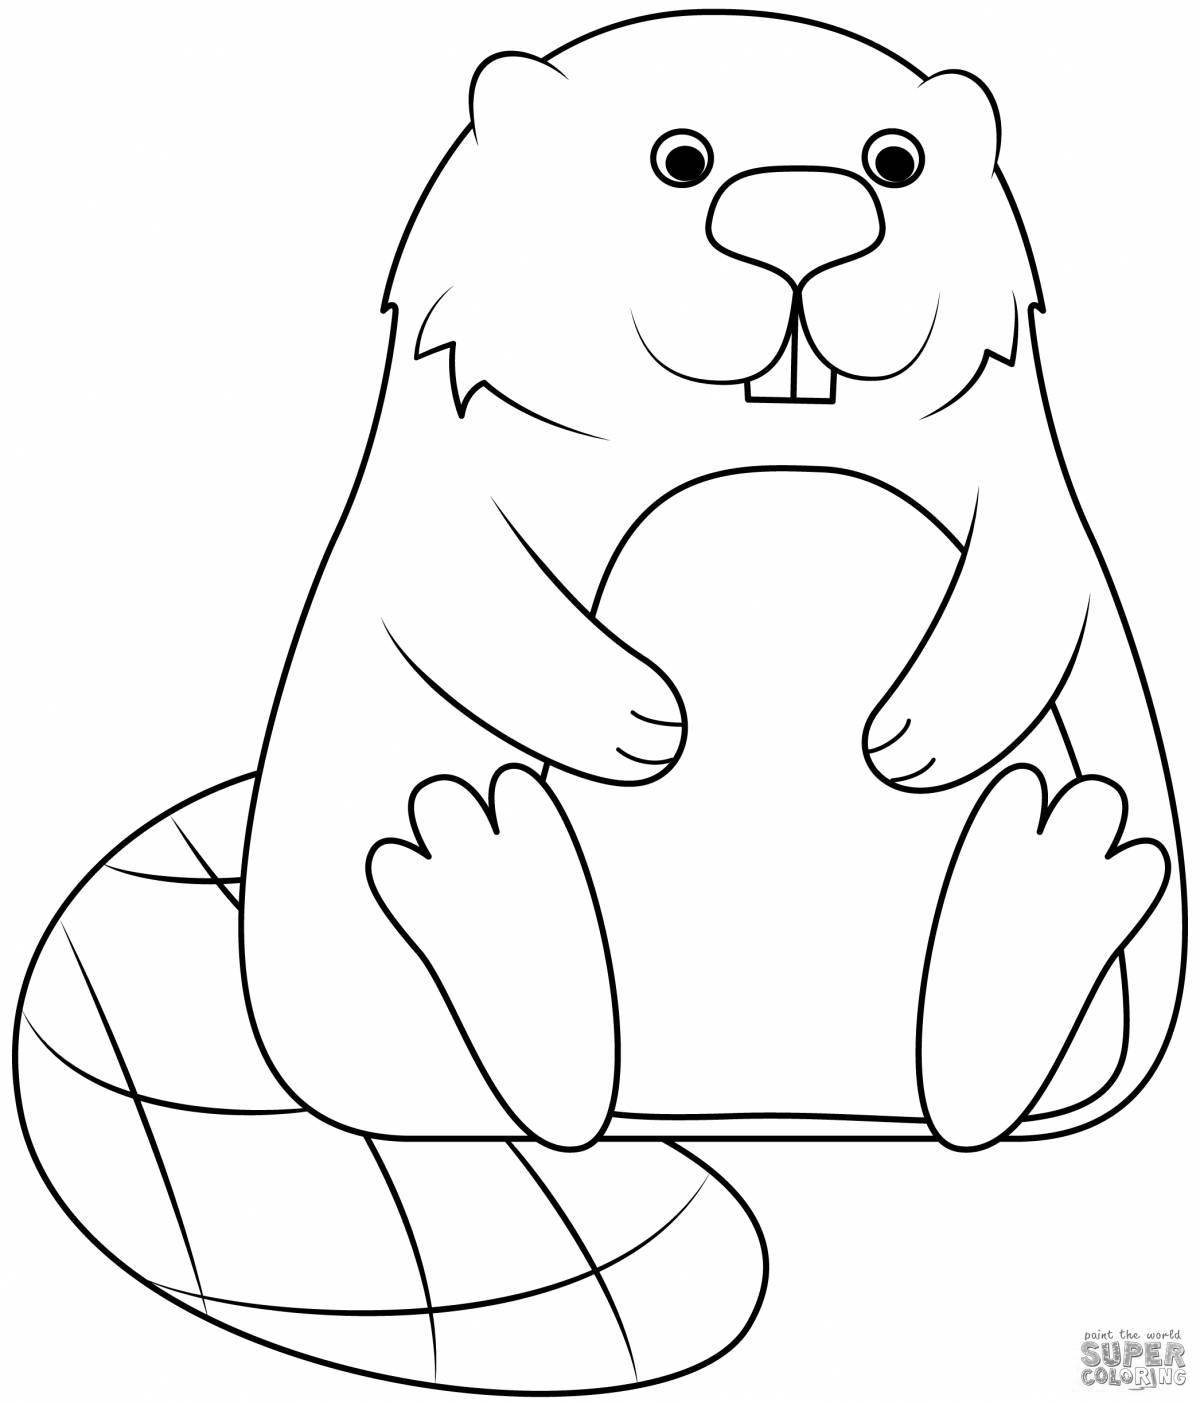 Coloring book nice beaver for kids